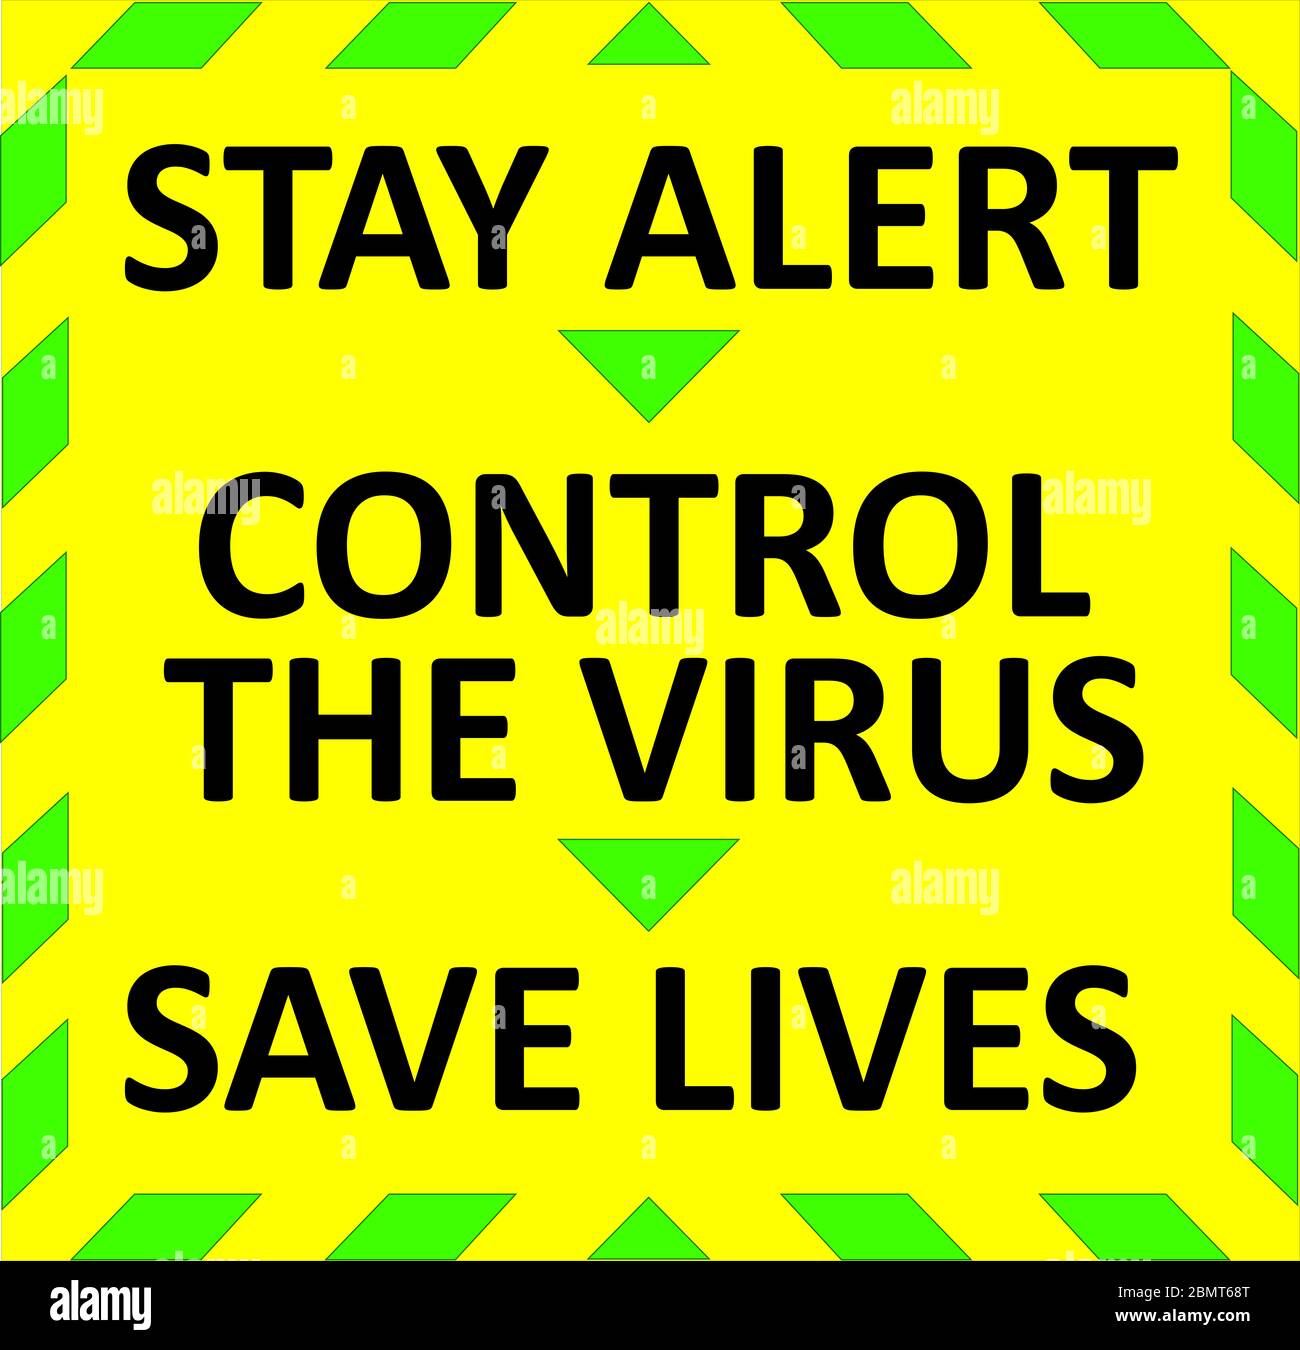 STAY ALERT, CONTROL THE VIRUS, SAVE LIVES warning sign. Green quarantine sign that help to battle against Covid-19 in the United Kingdom. Stock Photo